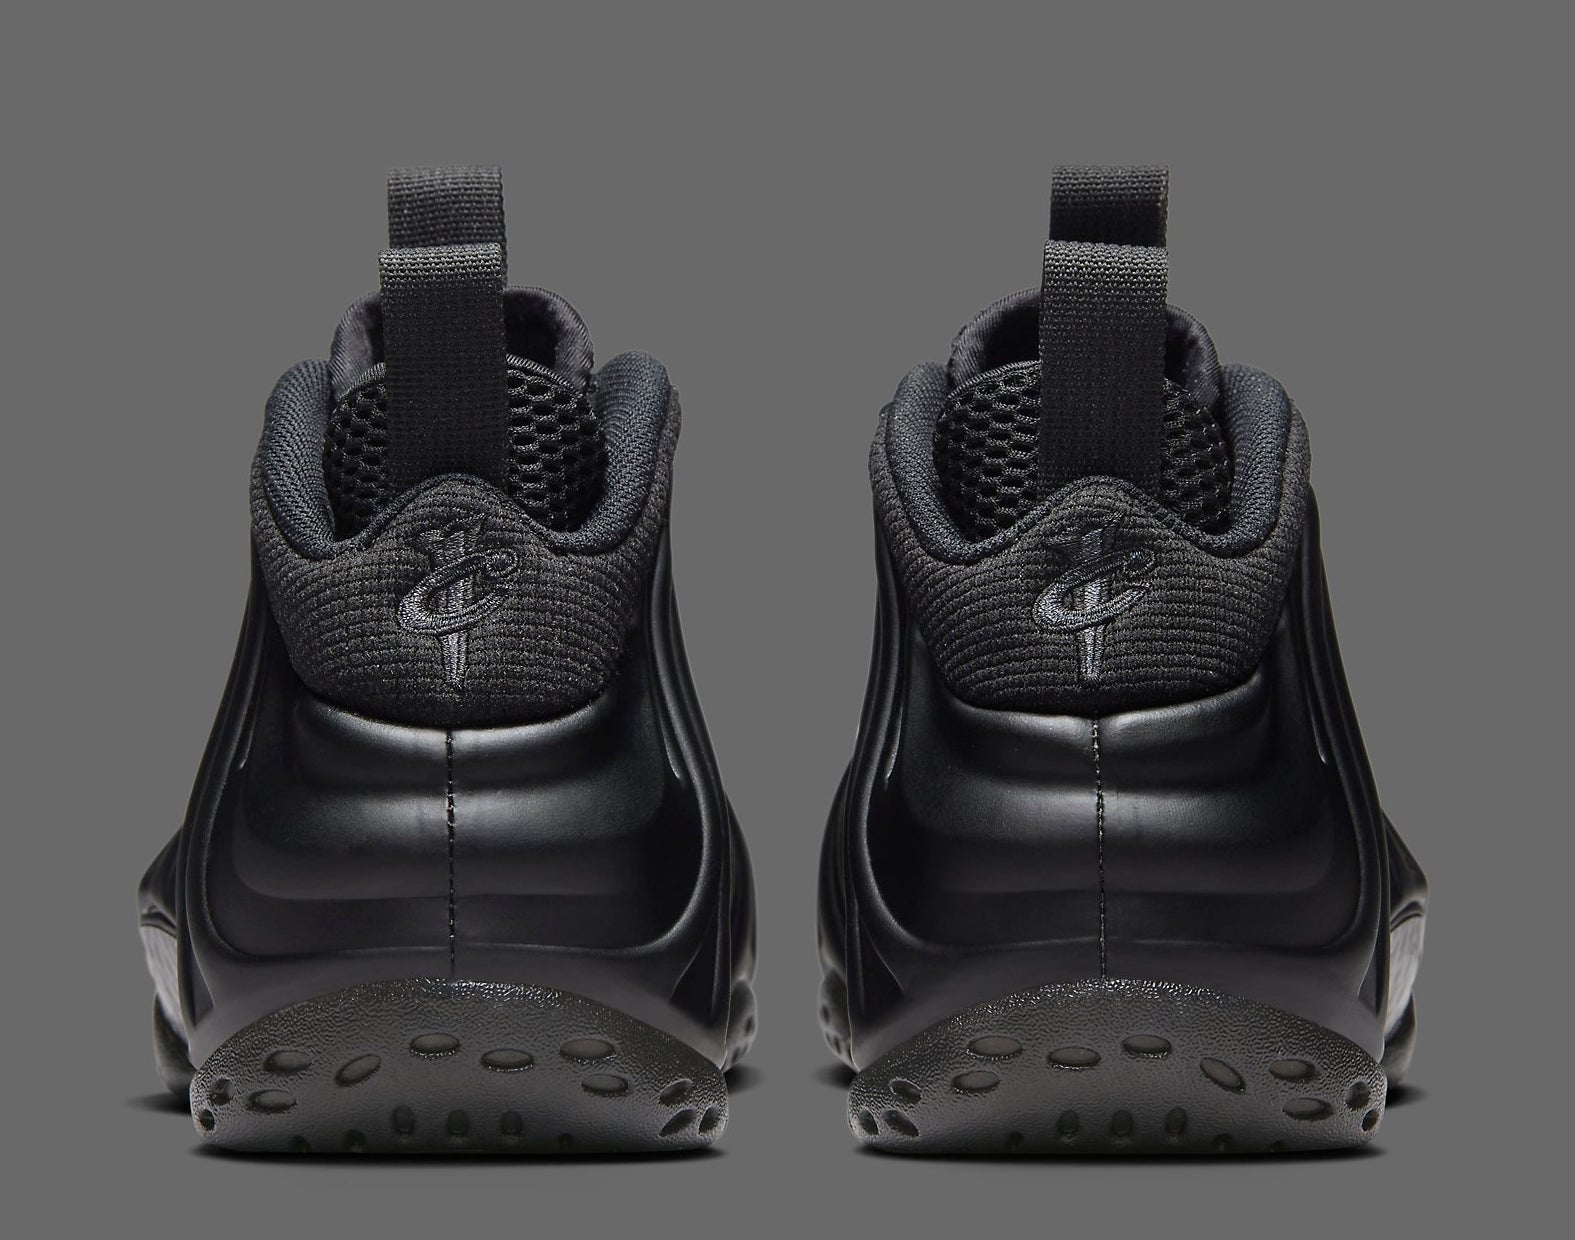 Official Look at This Year's 'Anthracite' Nike Foamposite One | Complex